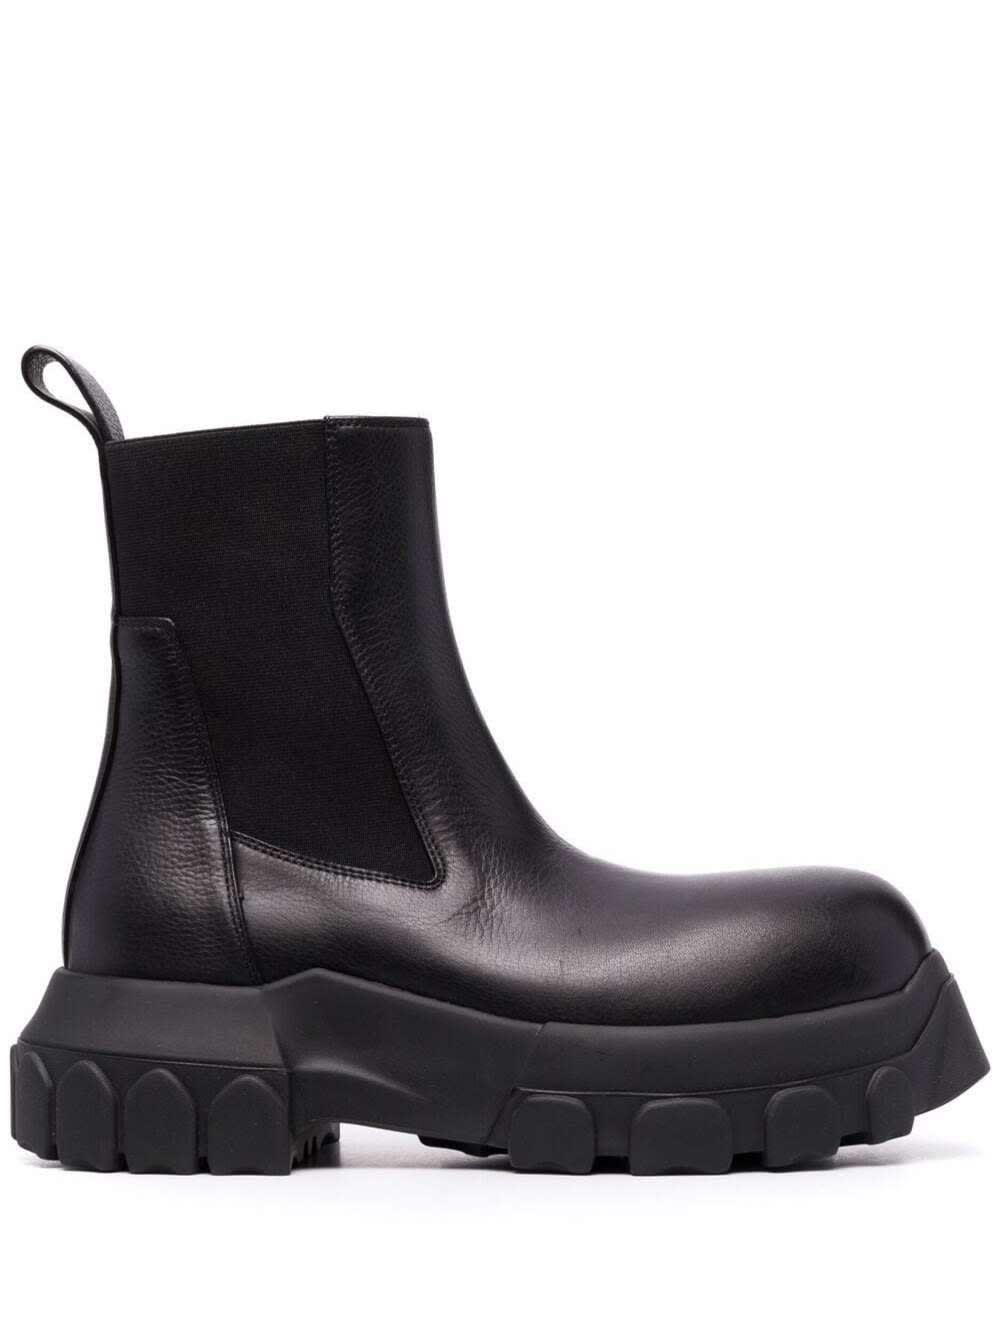 Rick Owens Chunky Black Leather Boots